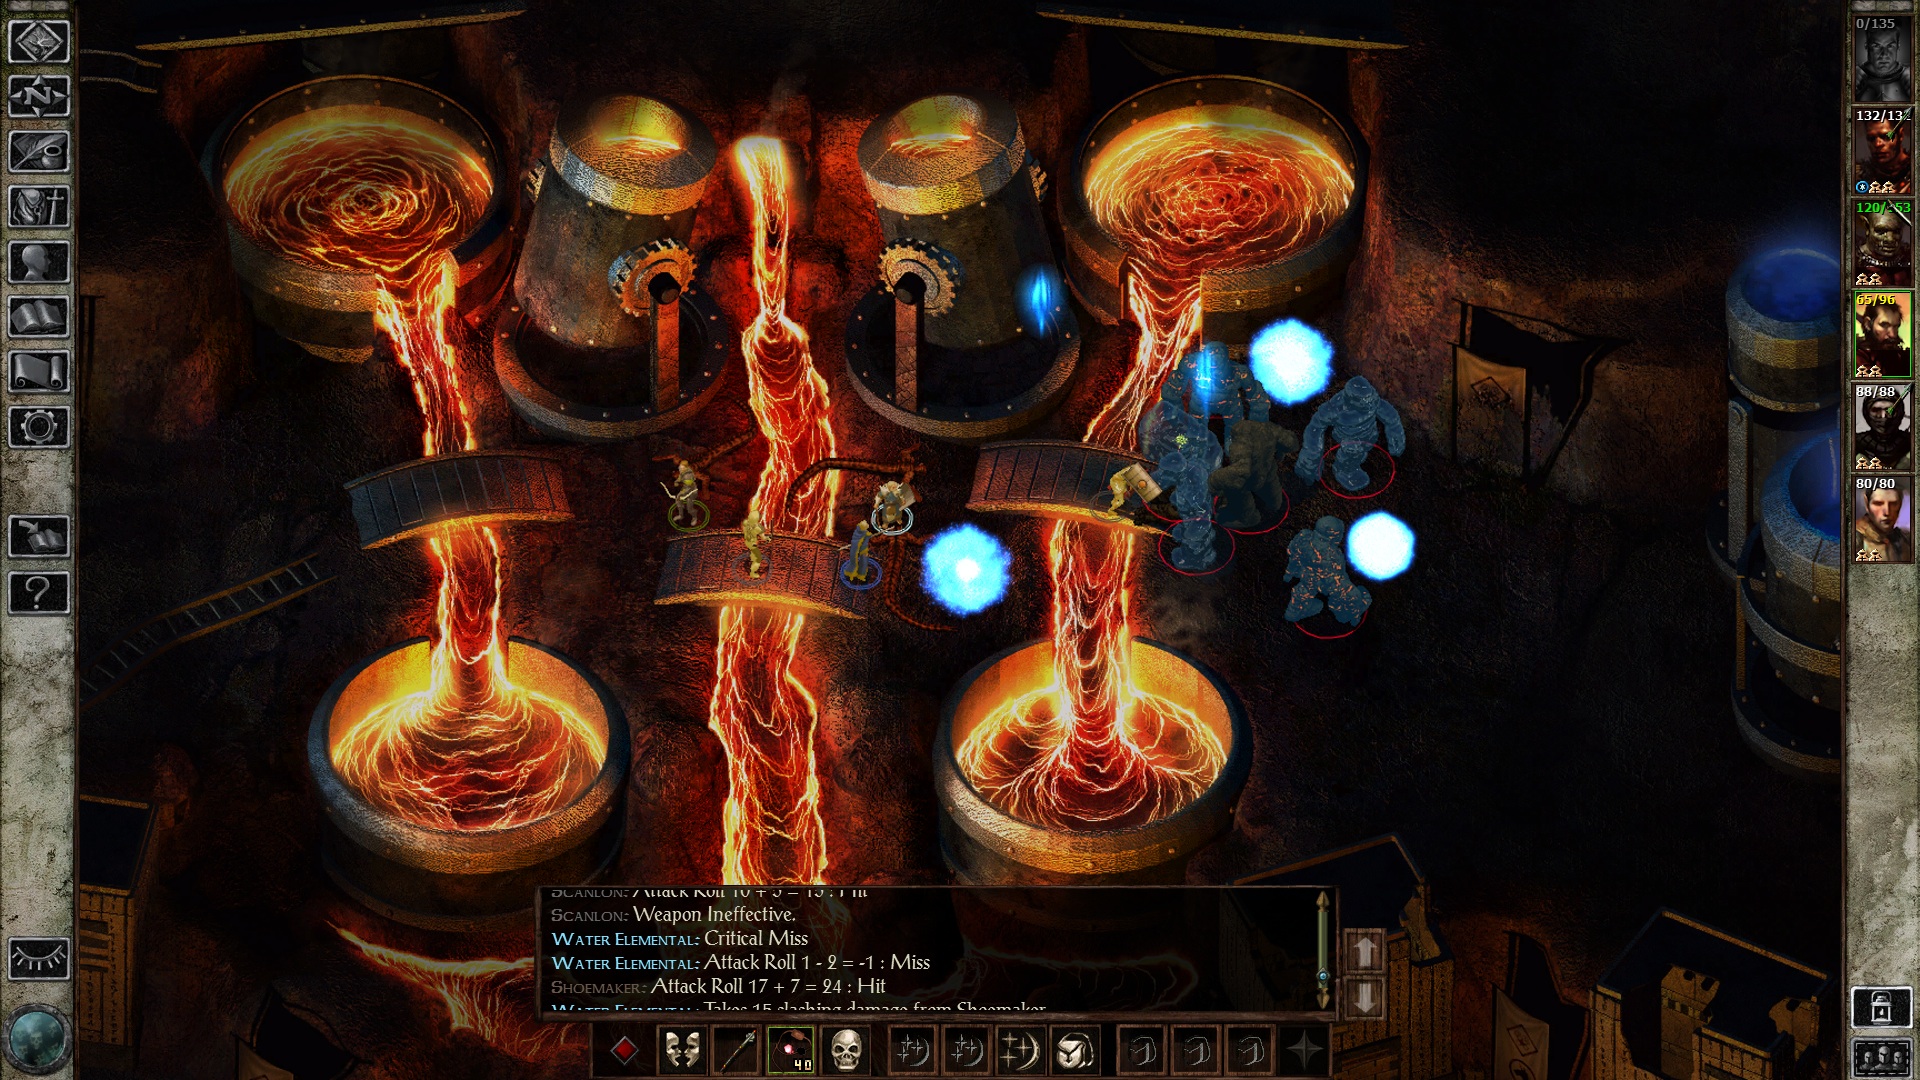 Classic Dungeons & Dragons RPG Icewind Dale is getting an 'enhanced edition'